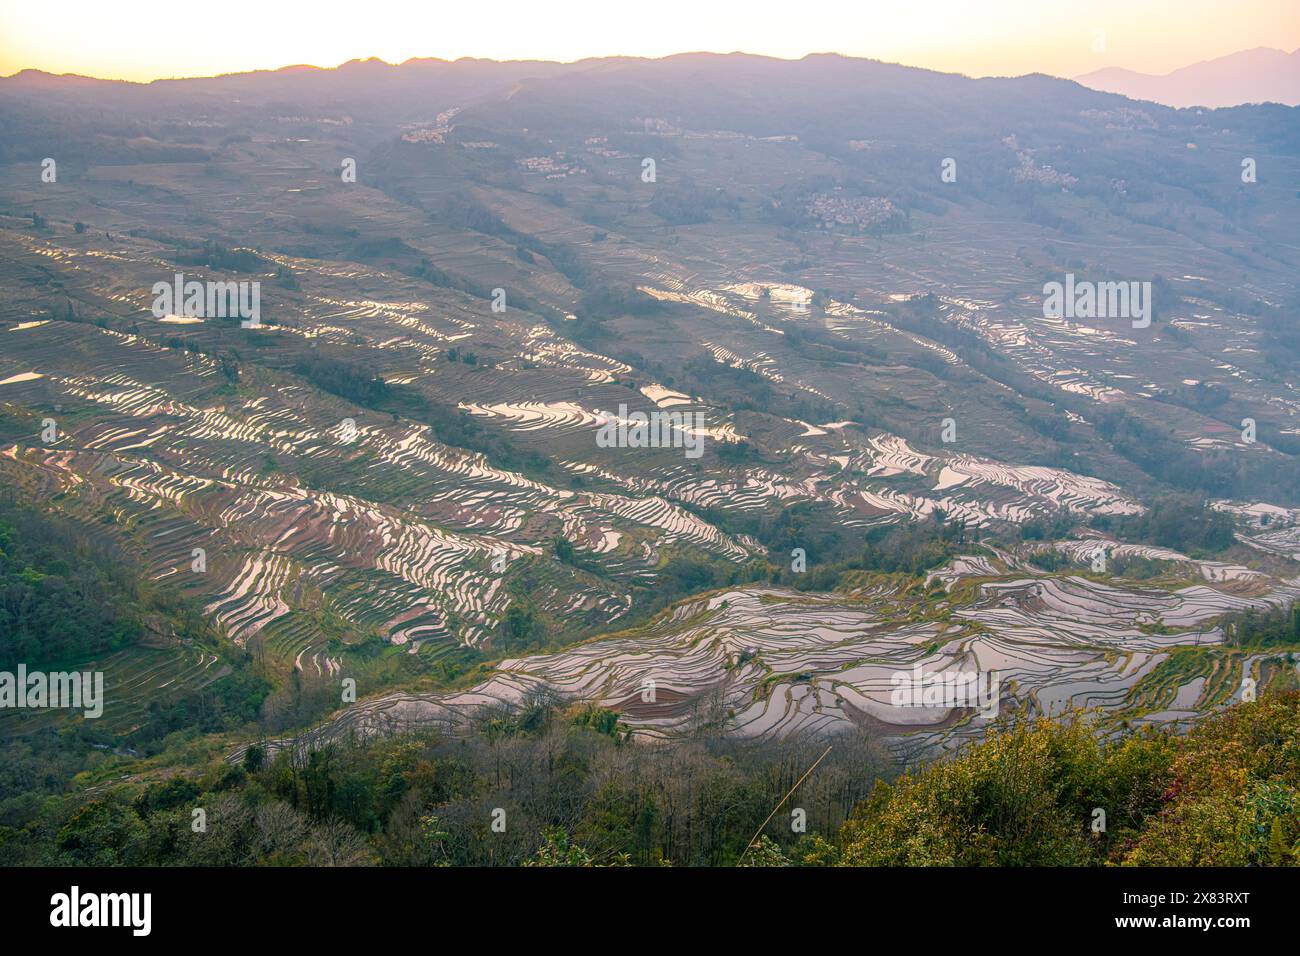 Yuan Yang Rice Terraces - Bada under the sunset in Yunnan province of China. Close up image with copy space Stock Photo